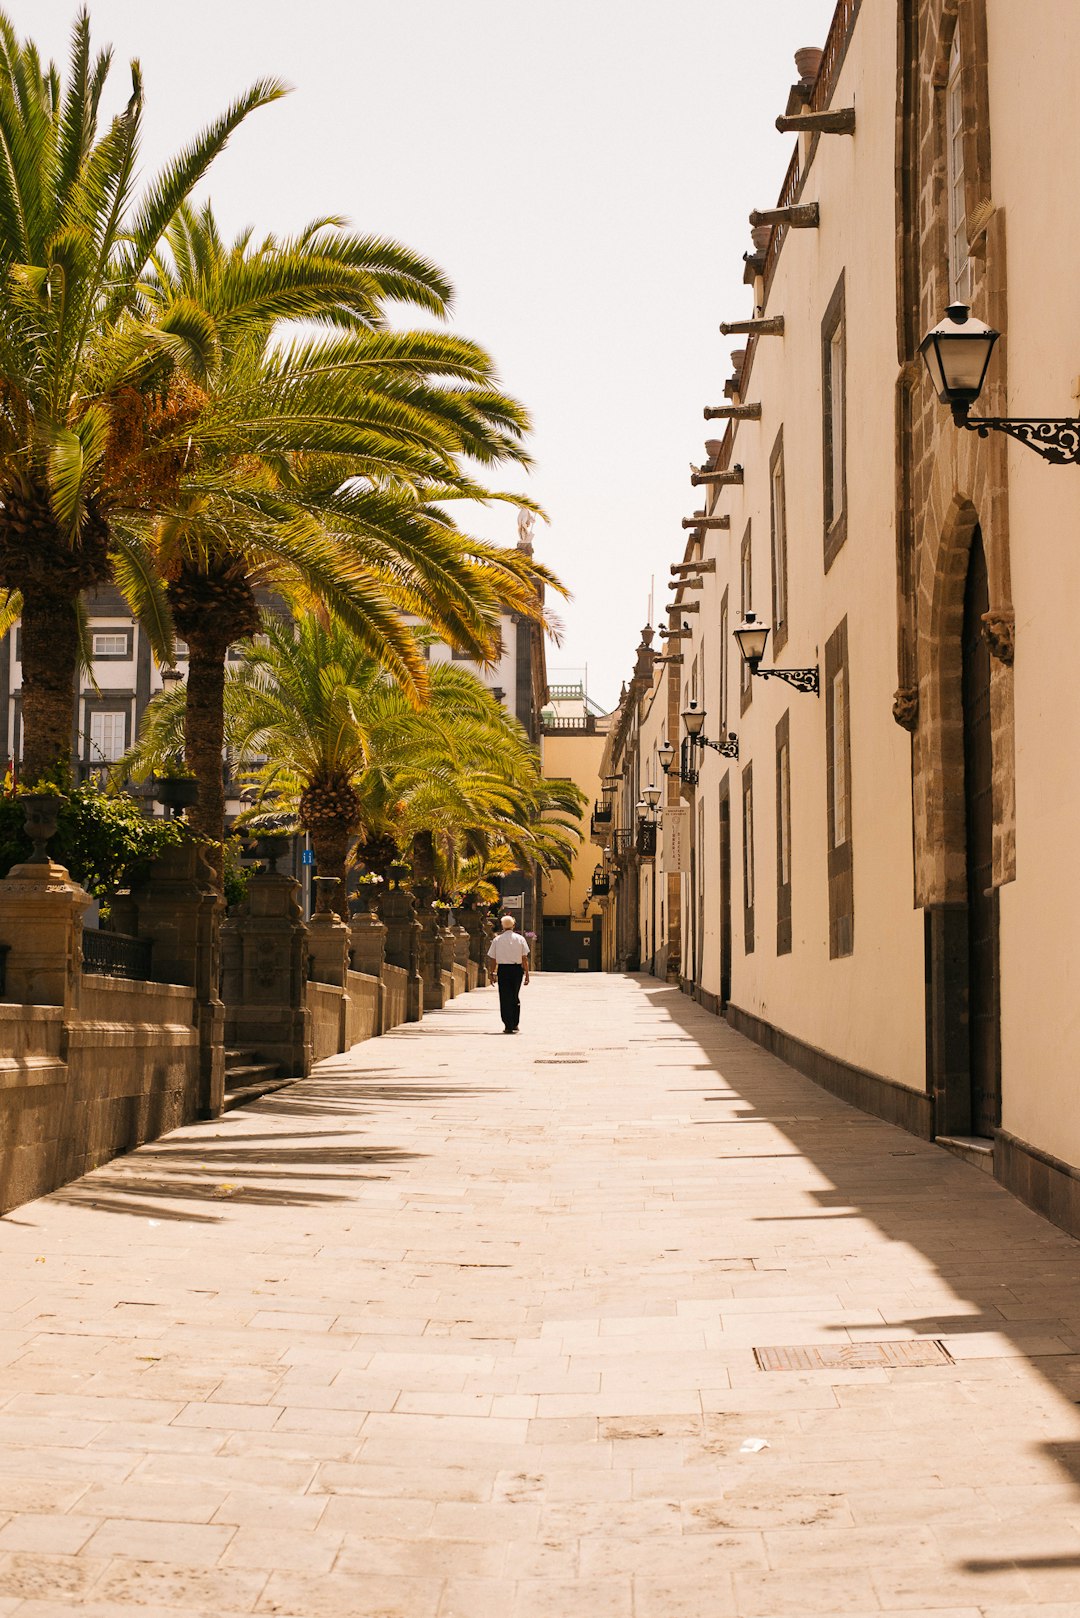 Town photo spot Canary Islands Spain